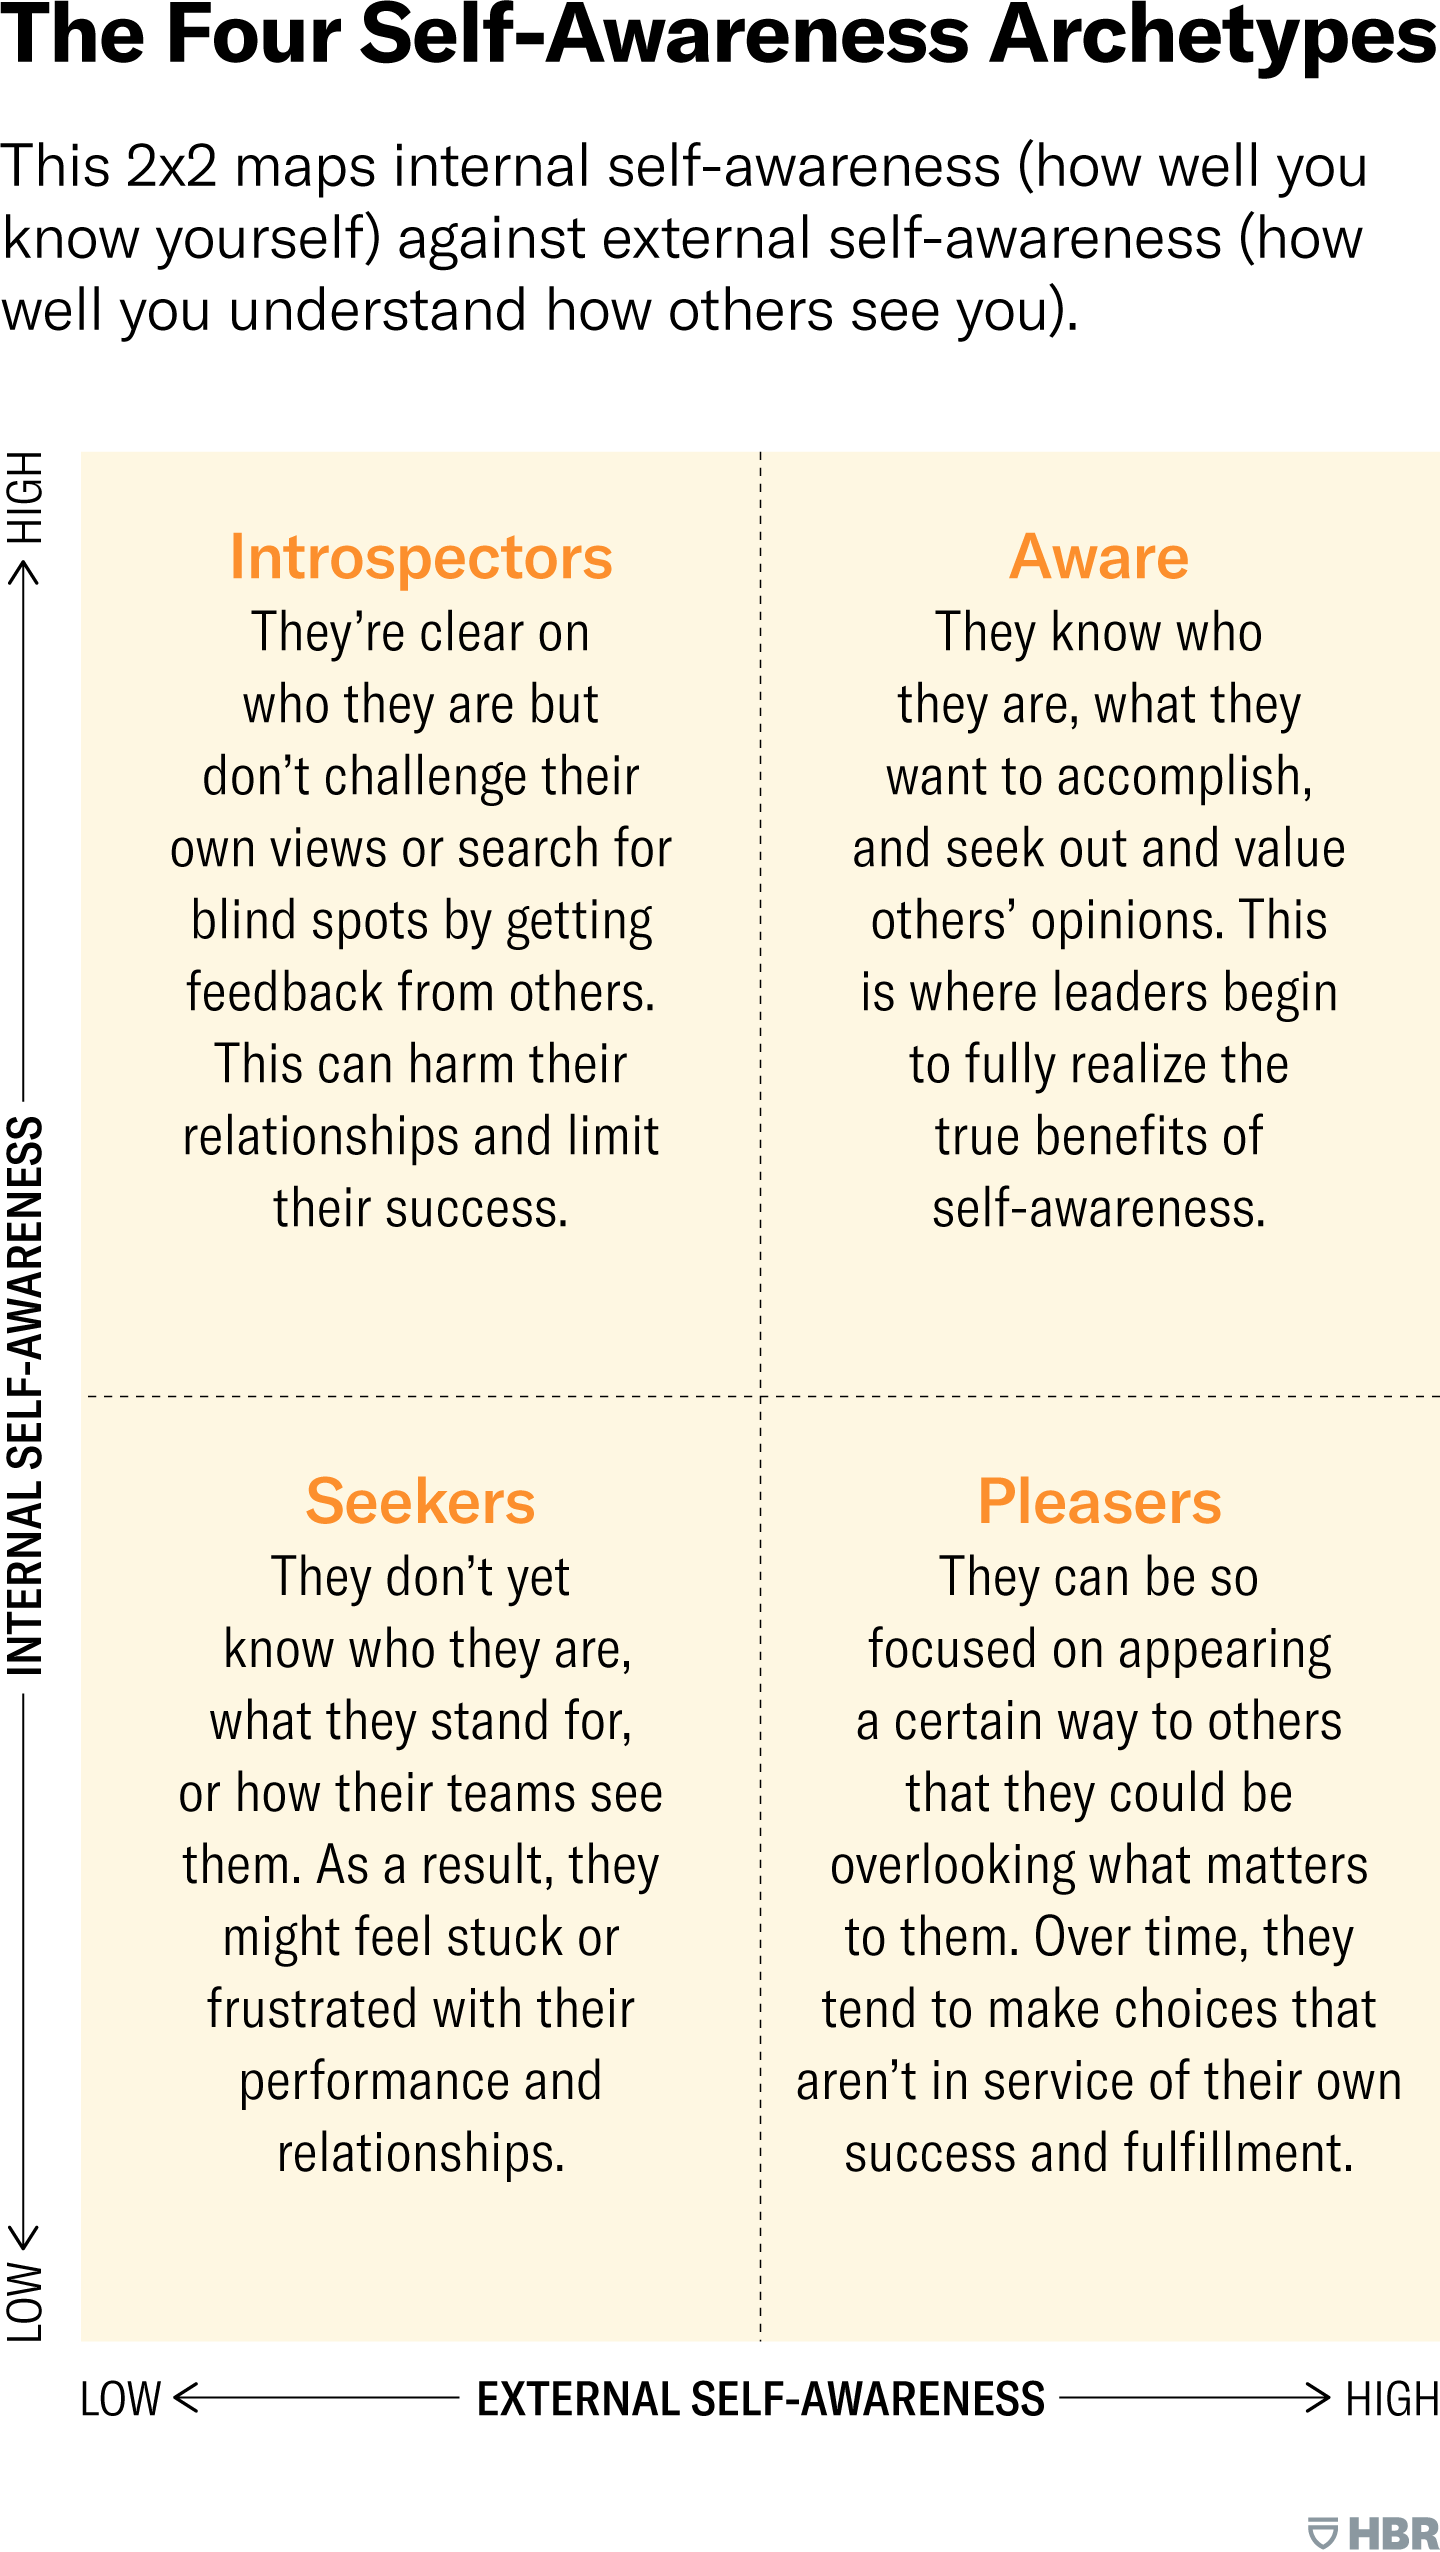 The Four Self-Awareness Archetypes. A 2-by-2 matrix maps internal self-awareness, or how well you know yourself, against external self-awareness, or how well you understand how others see you. These are the archetypes and their characteristics: Seekers, who have both low internal self-awareness and low external self-awareness. They don’t yet know who they are, what they stand for, or how their teams see them. As a result, they might feel stuck or frustrated with their performance and relationships. Pleasers, who have low internal self-awareness but high external self-awareness. They can be so focused on appearing a certain way to others that they could be overlooking what matters to them. Over time, they tend to make choices that aren’t in service of their own success and fulfillment. Introspectors, who have high internal self-awareness but low external self-awareness. They’re clear on who they are but don’t challenge their own views or search for blind spots by getting feedback from others. This can harm their relationships and limit their success. Finally, Individuals who have both high internal self-awareness and high external self-awareness are considered Aware. They know who they are, what they want to accomplish, and seek out and value others’ opinions. This is where leaders begin to fully realize the true benefits of self-awareness.